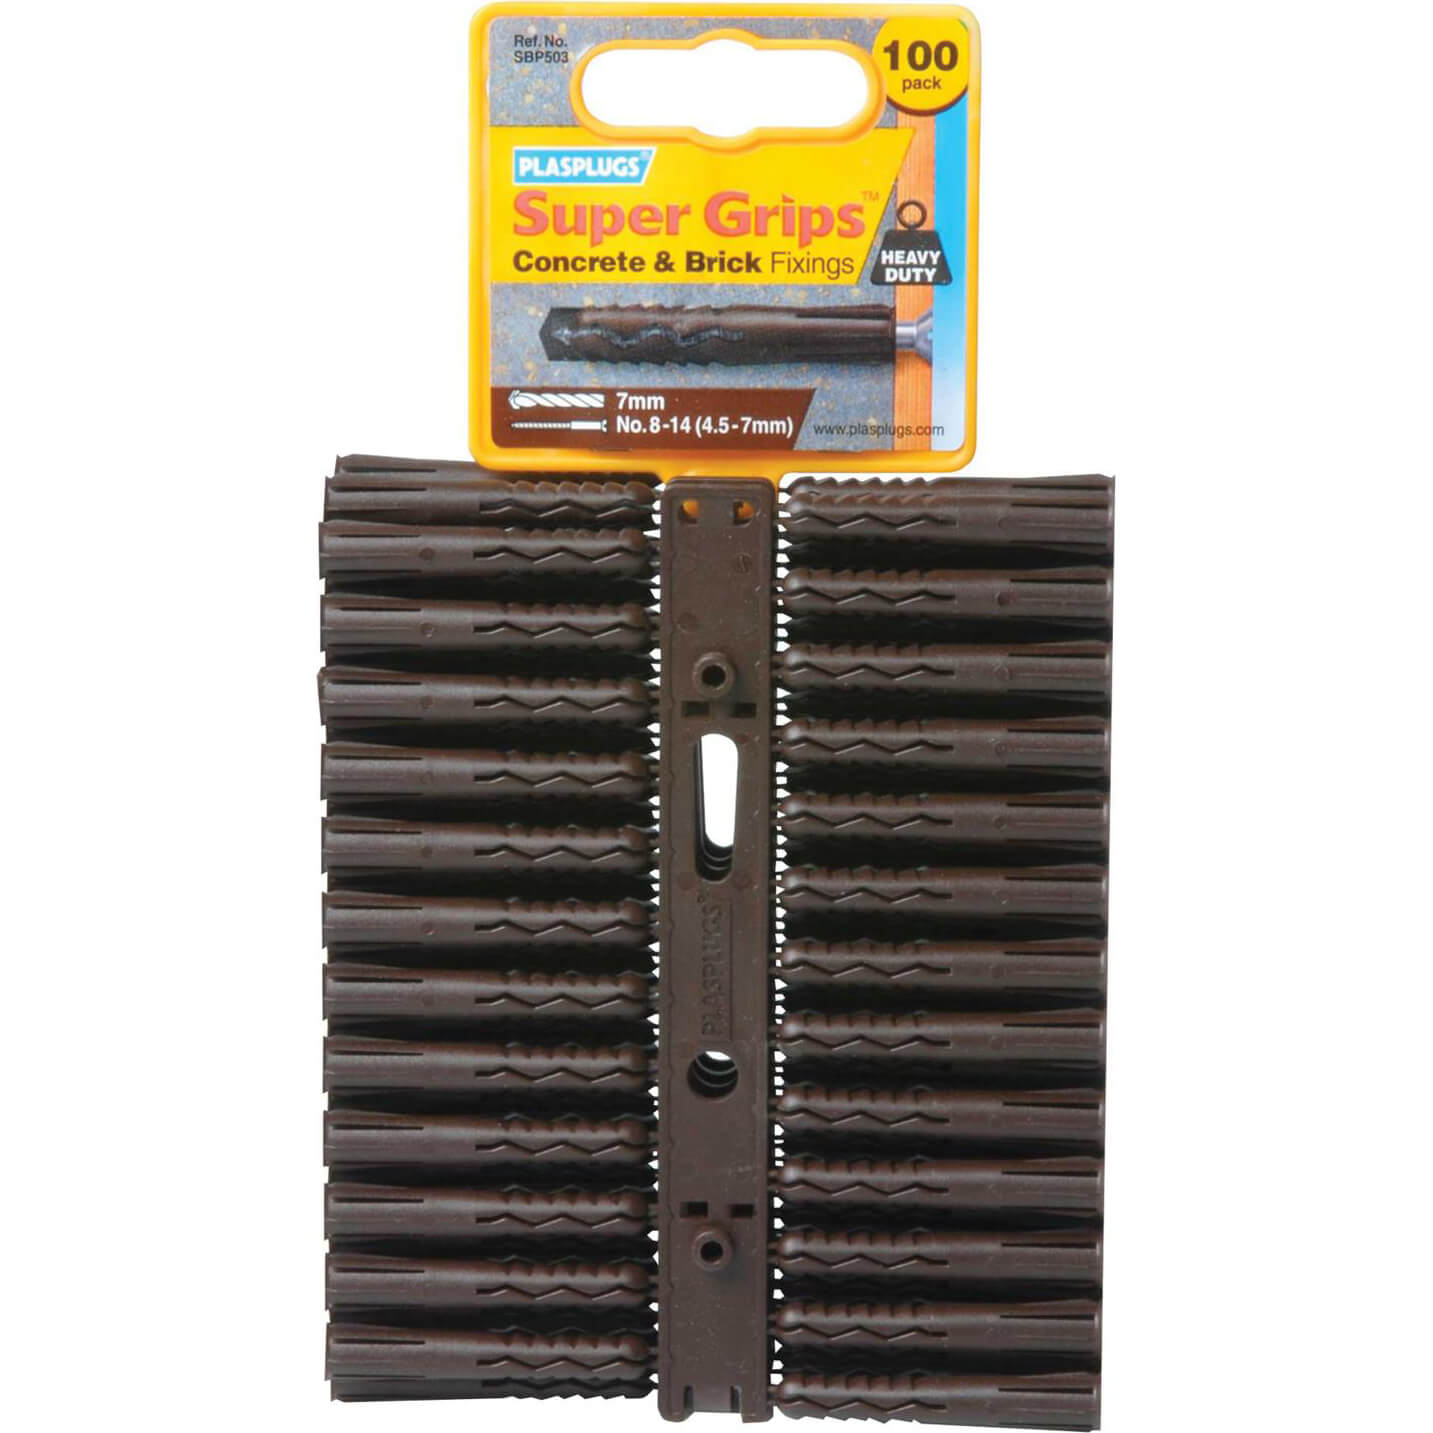 Photo of Plasplugs Heavy Duty Super Grips Concrete And Brick Fixings Pack Of 100